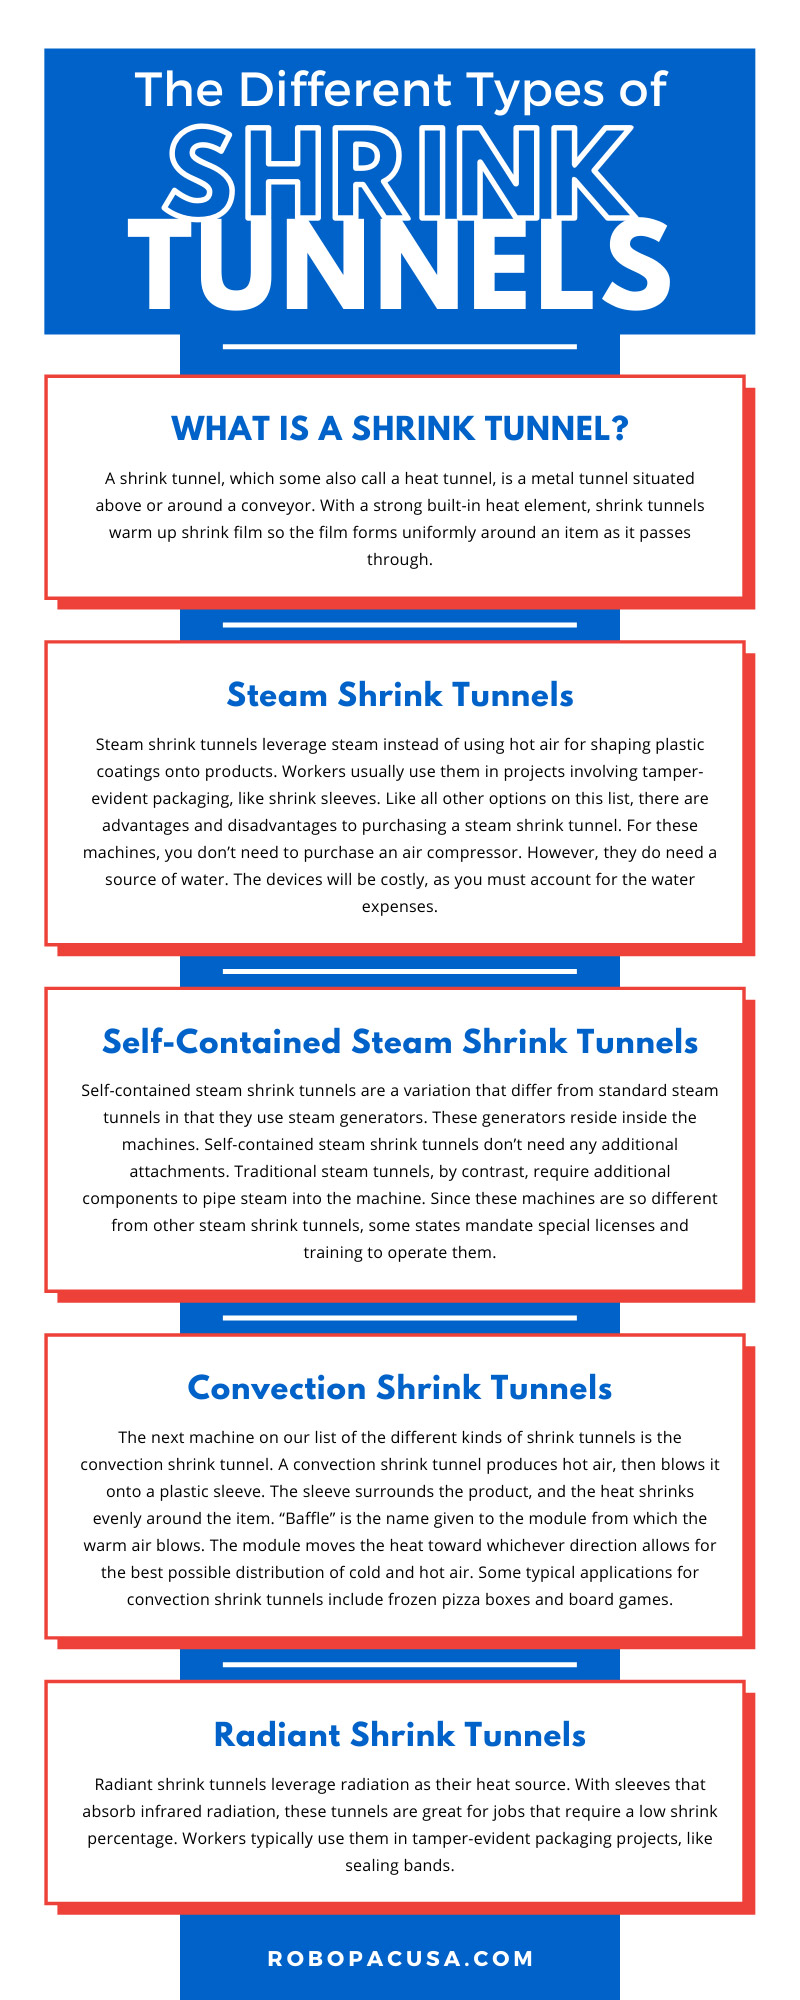 The Different Types of Shrink Tunnels